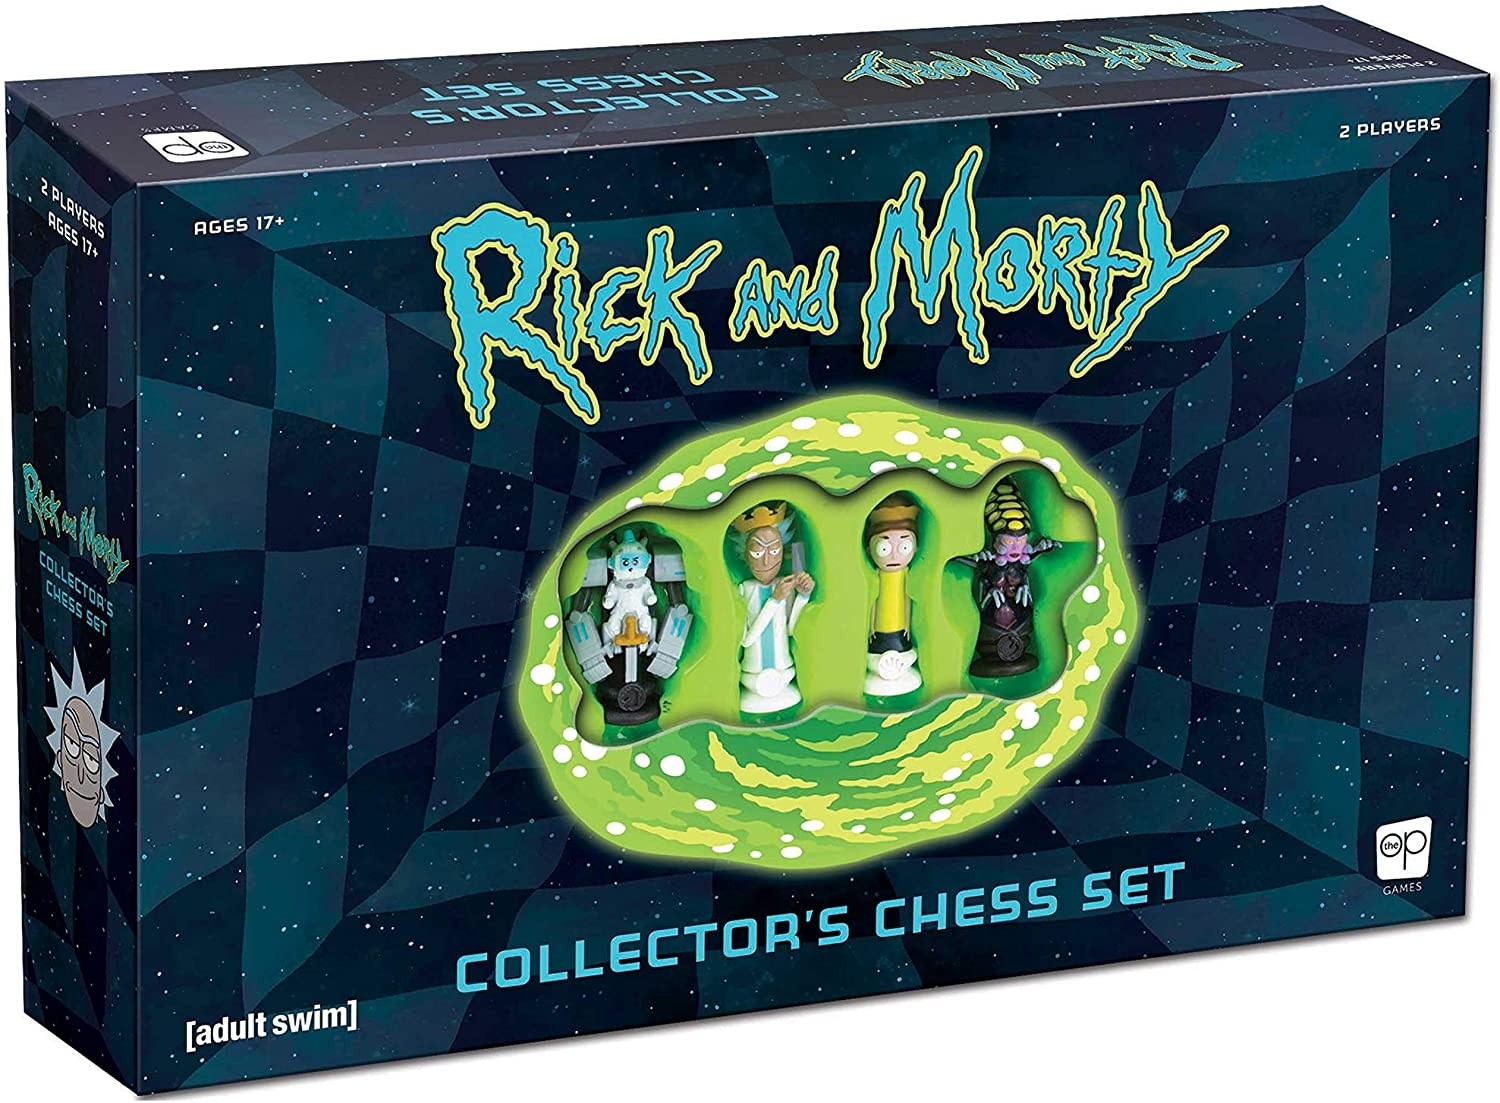 Rick and Morty - Collector's Chess Set